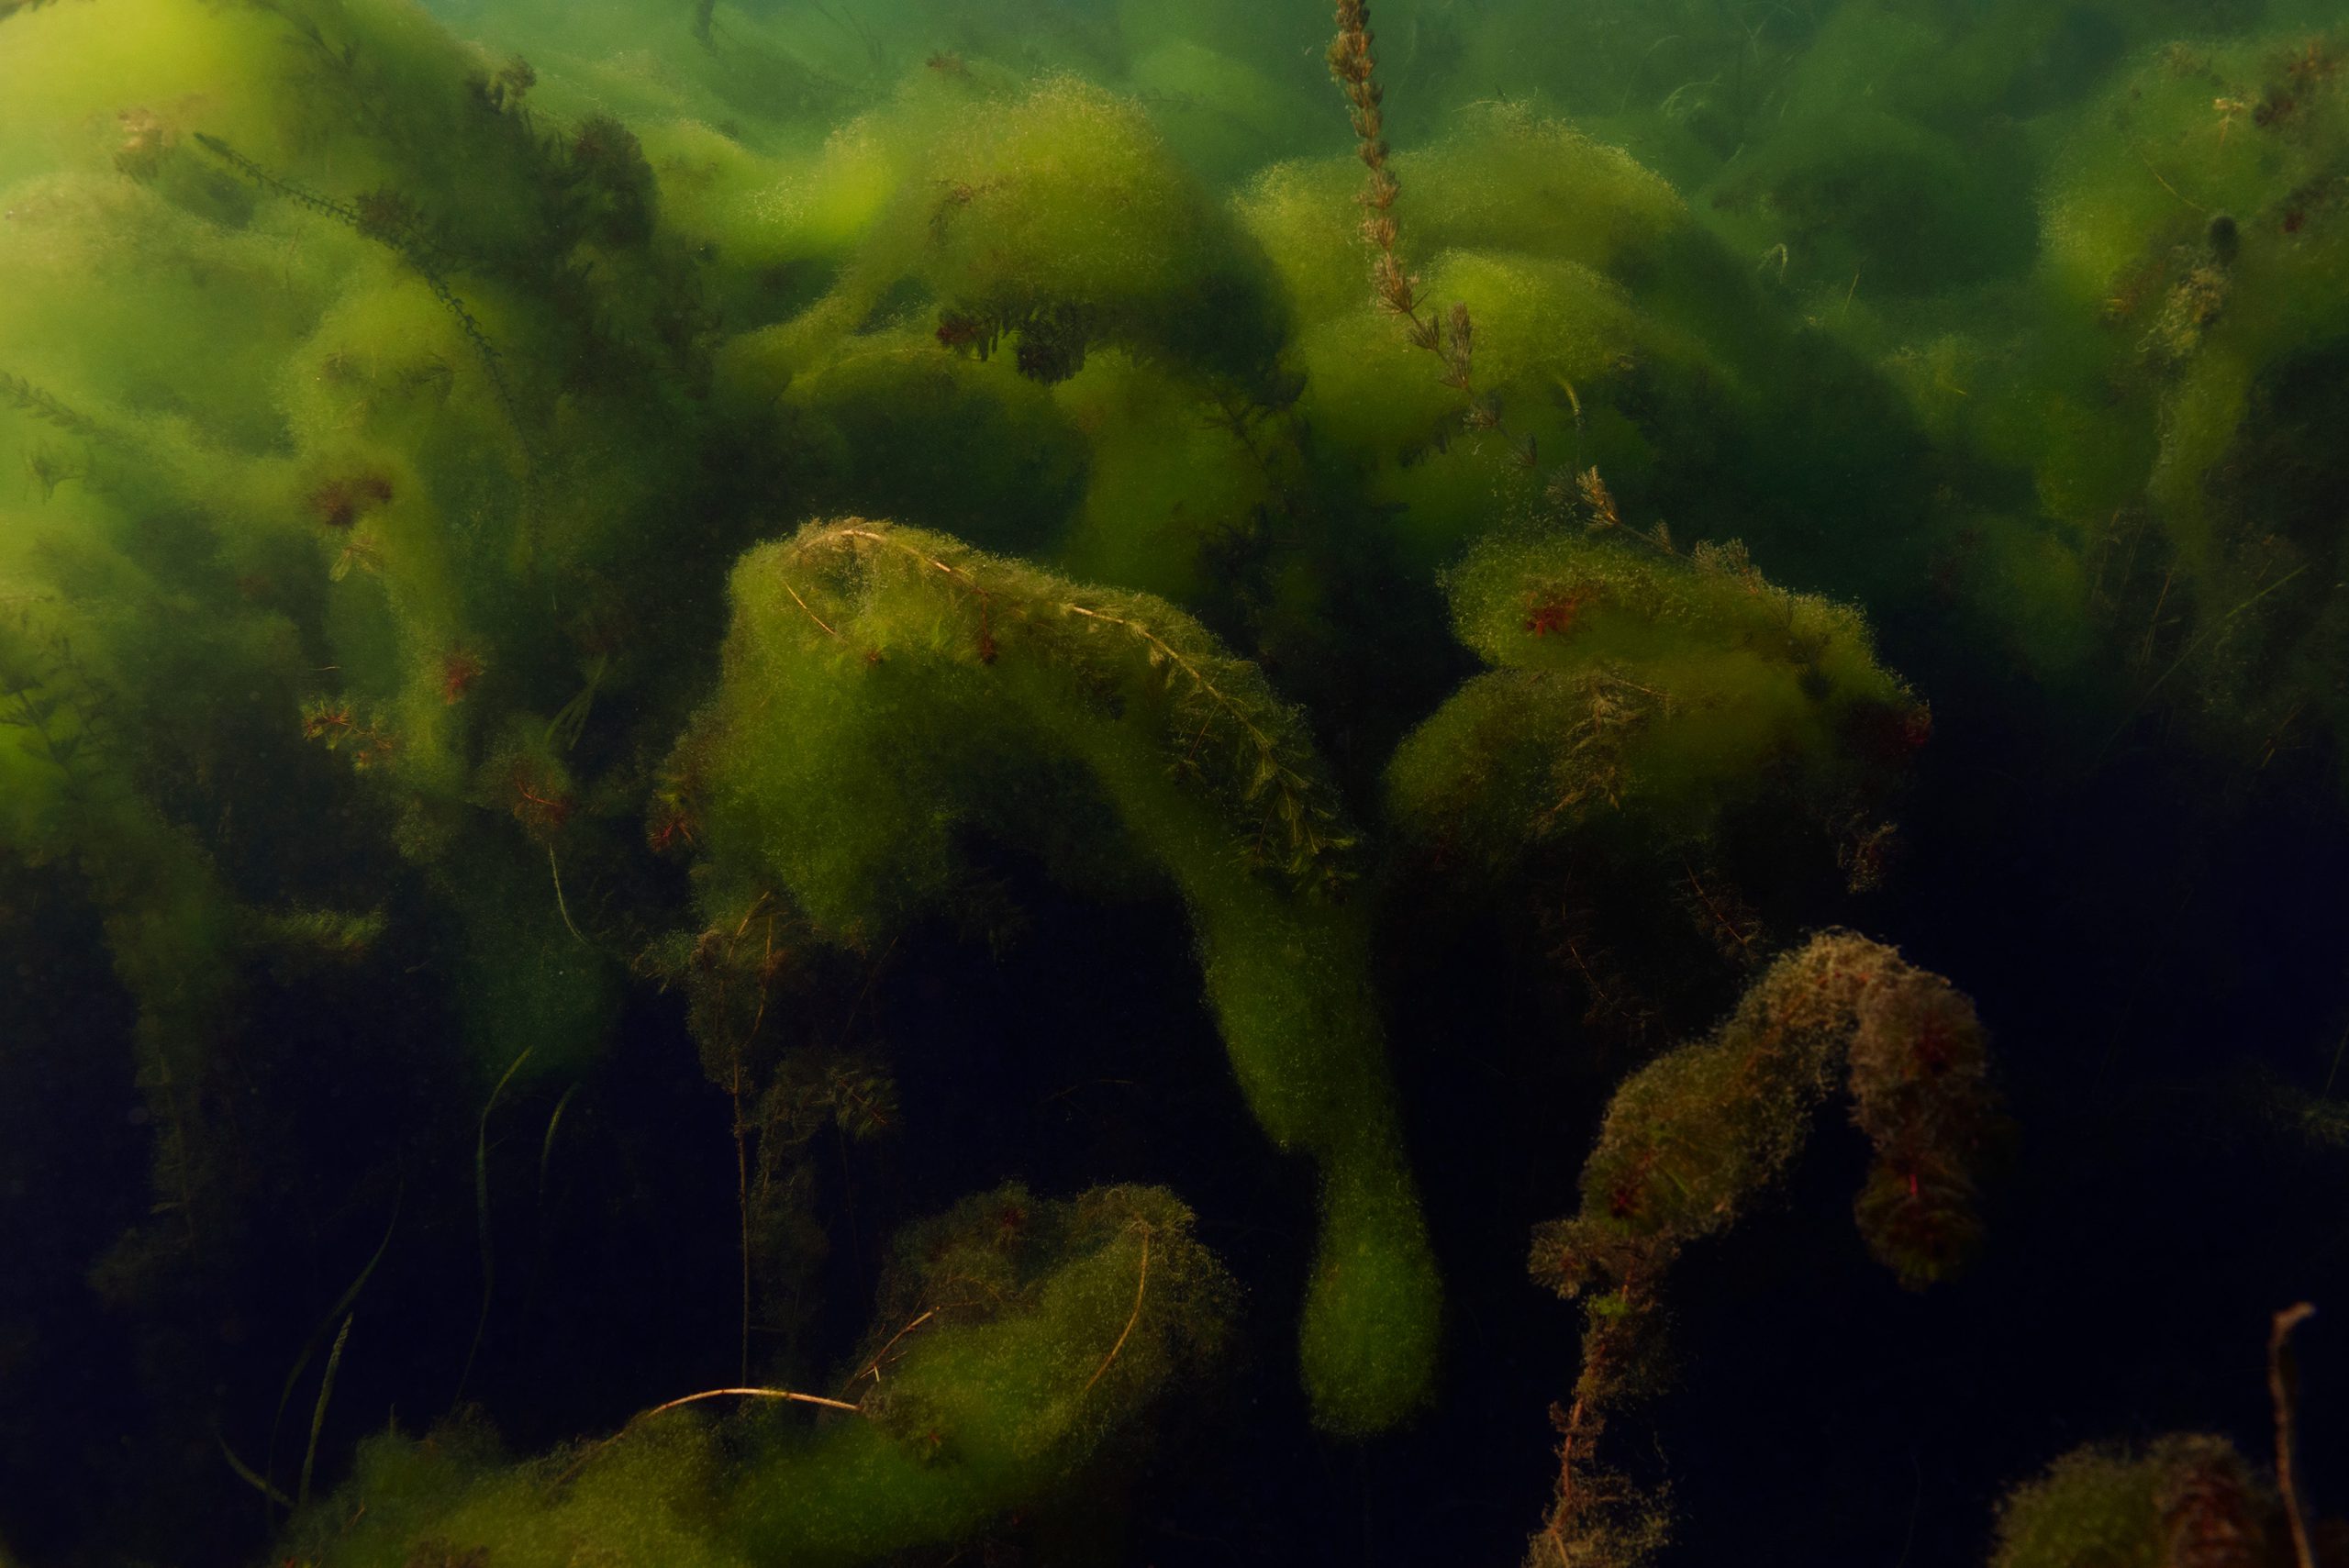 Underwater of green, brown and red bulbous looking plants.